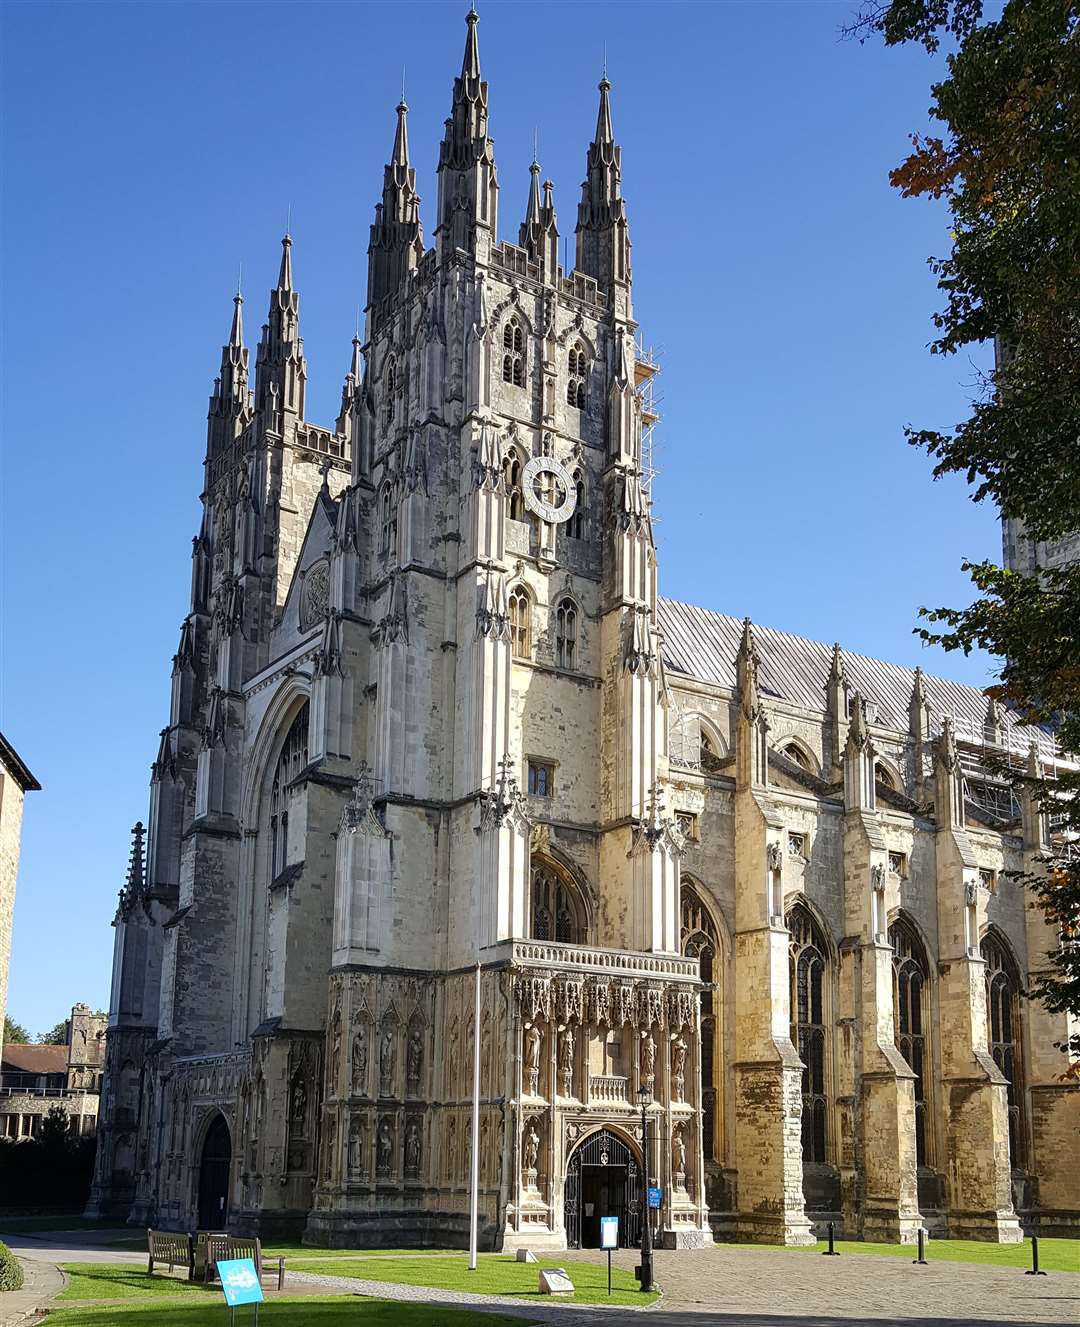 Canterbury Cathedral will not light up blue because its floodlighting does not permit the colour of the lights to be changed